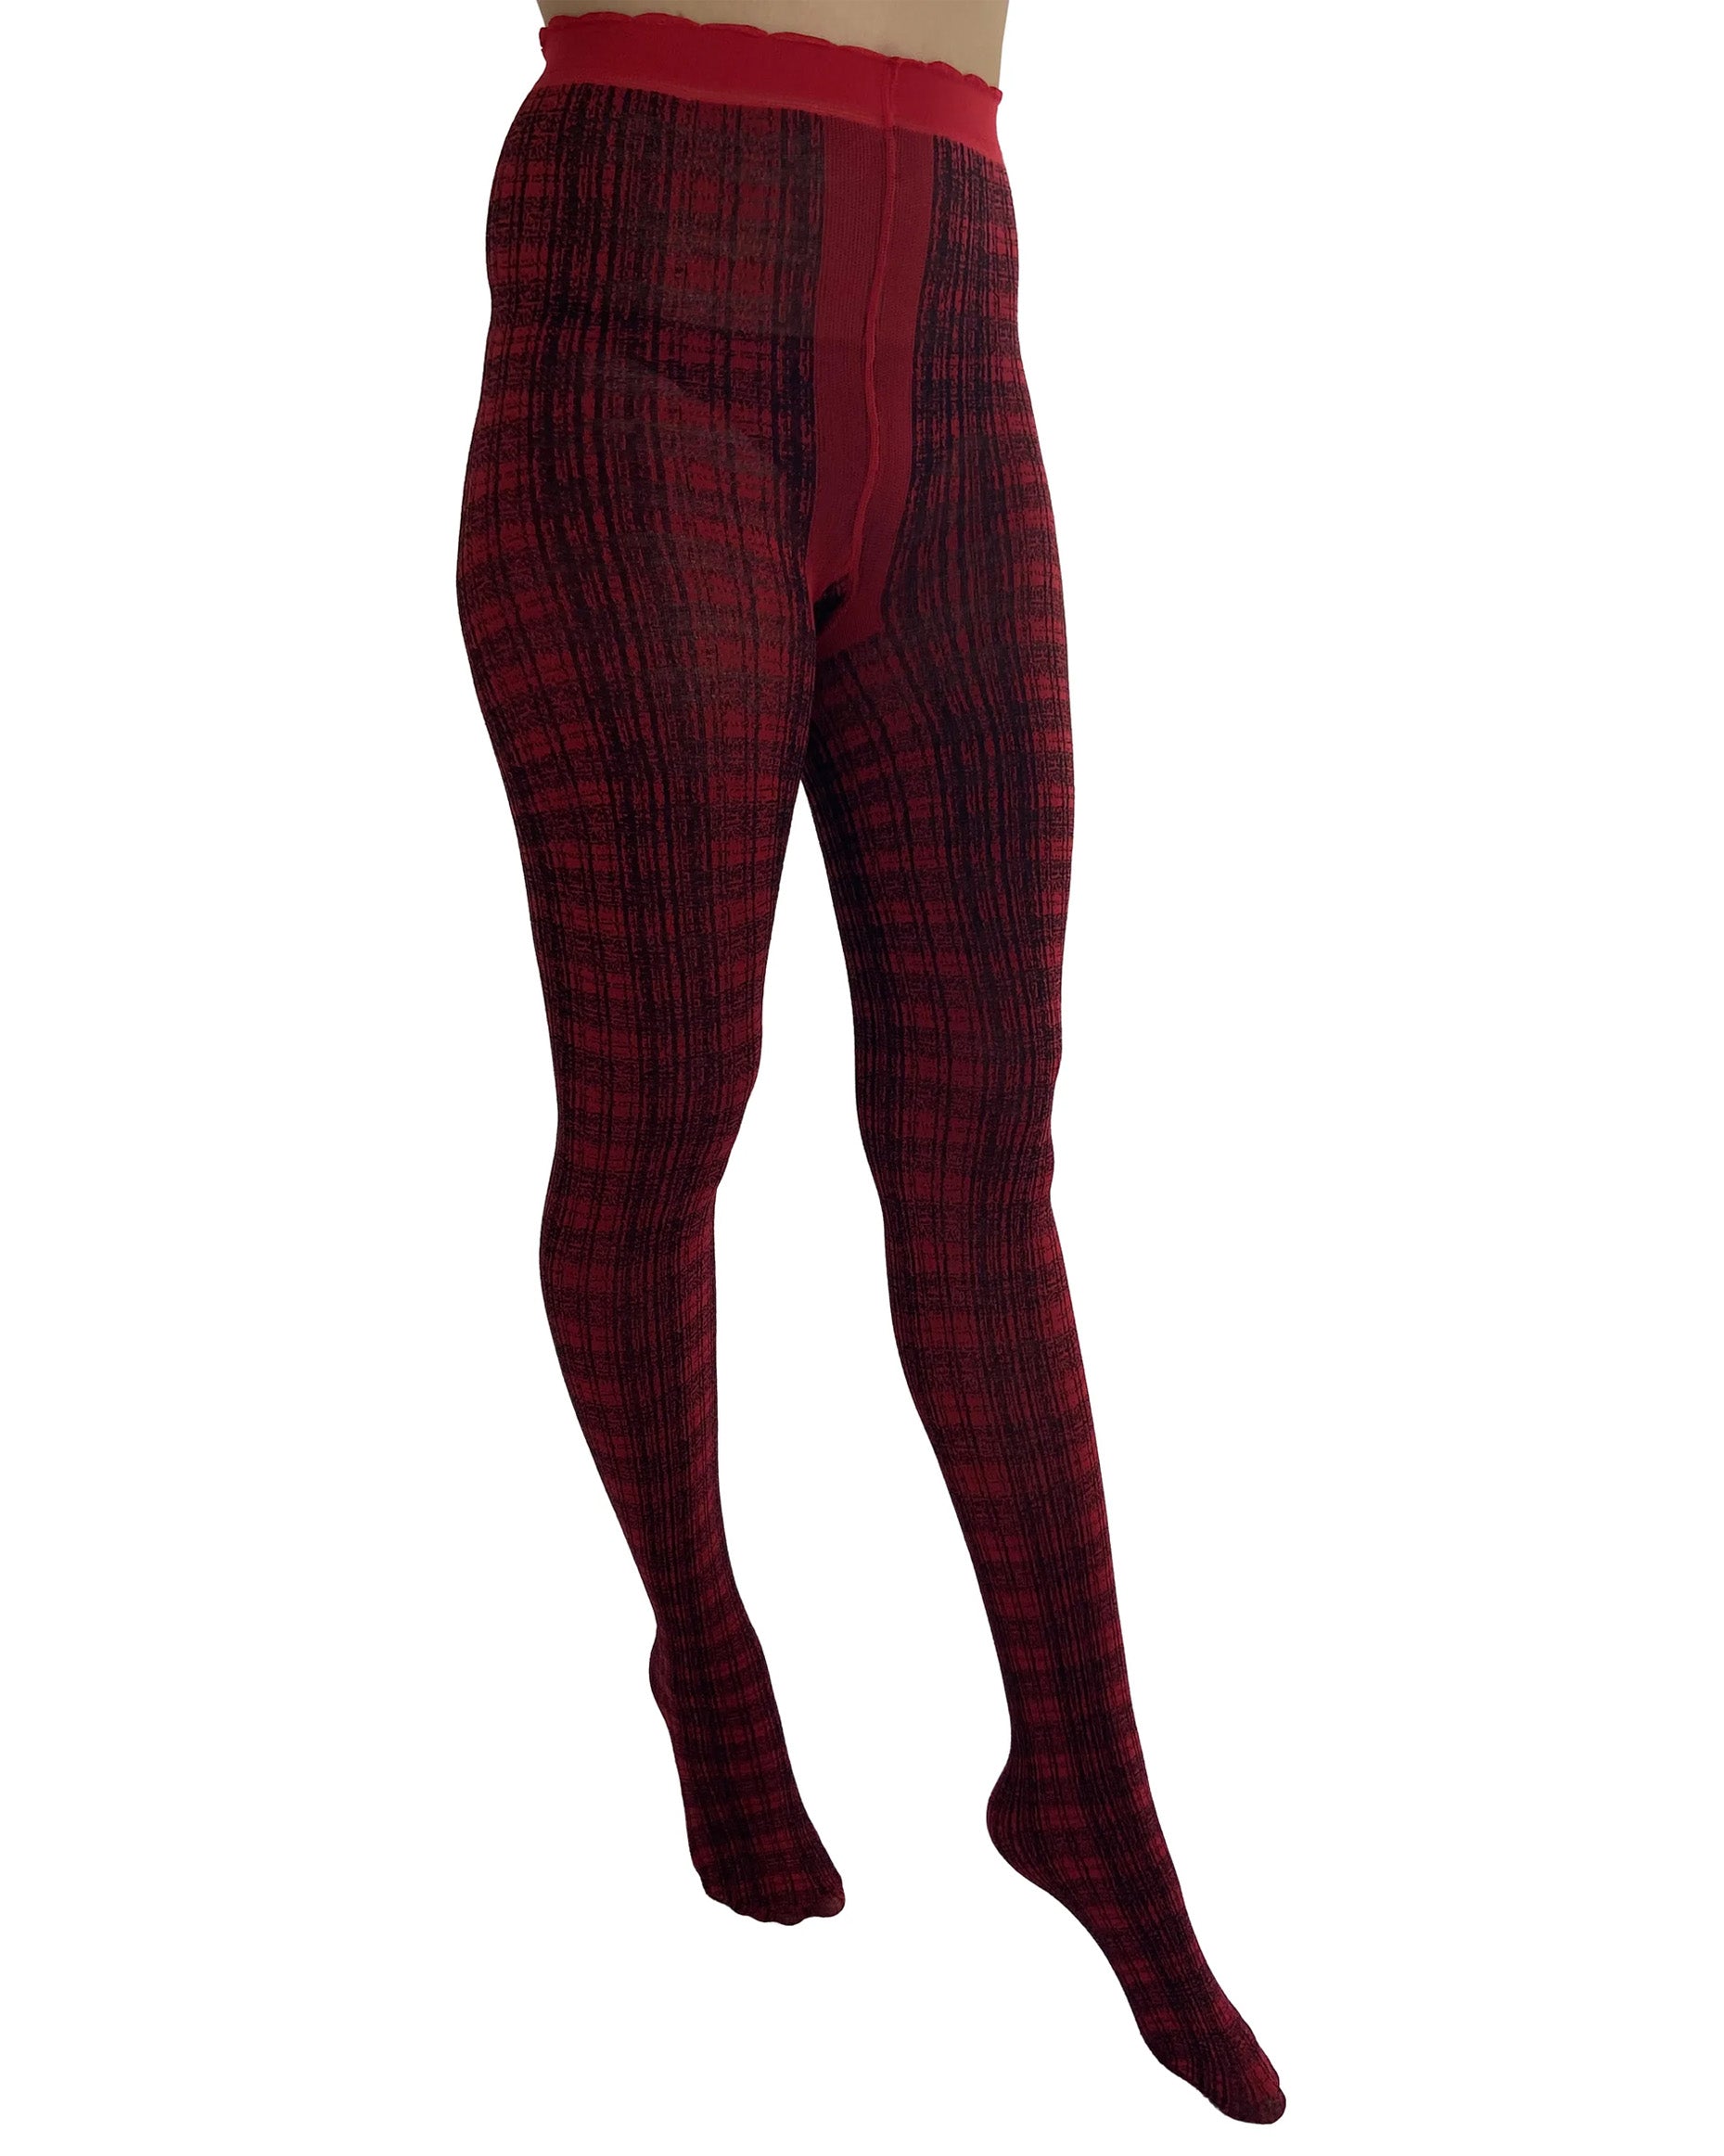 Pamela Mann Red Texture Tartan Tights - Red opaque fashion tights with a black textured tartan style pattern, comfort waistband, flat seams and gusset.